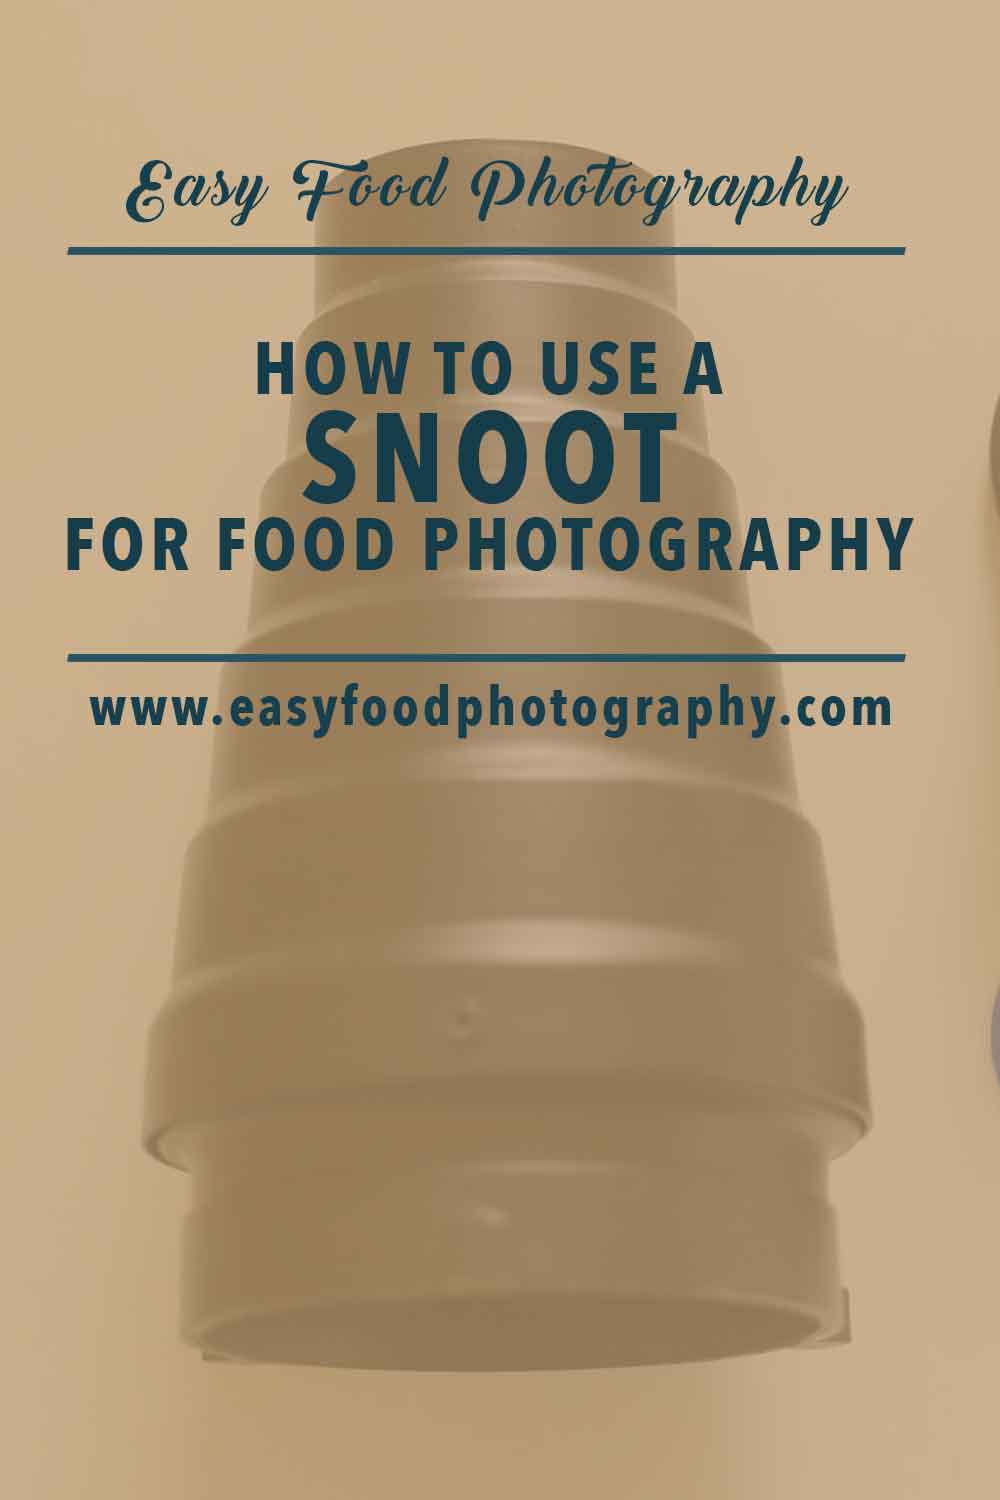 HOW TO USE A SNOOT FOR FOOD PHOTOGRAPHY